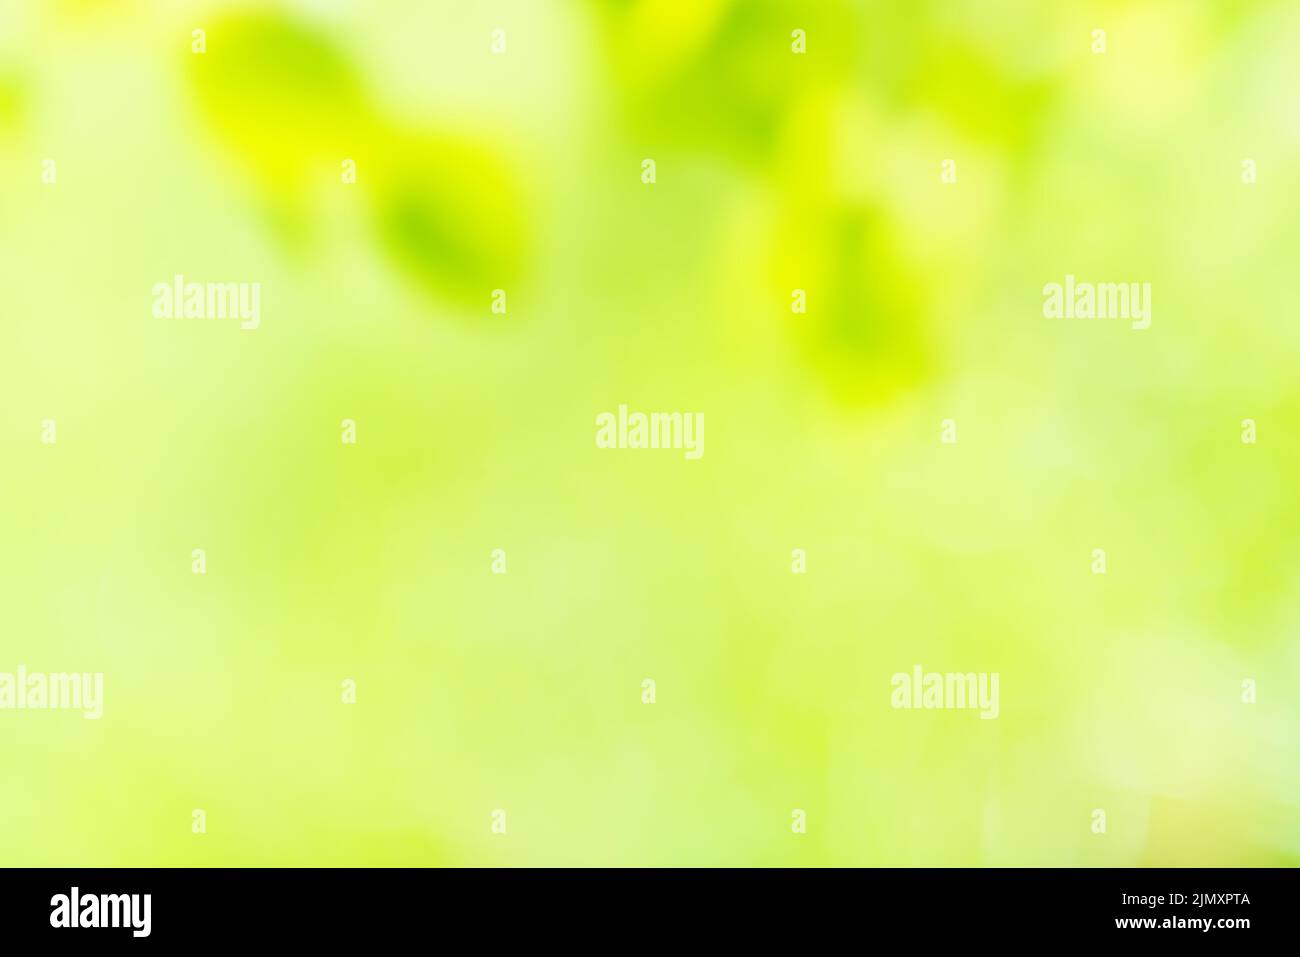 Green sunny blur nature background Stock Photo